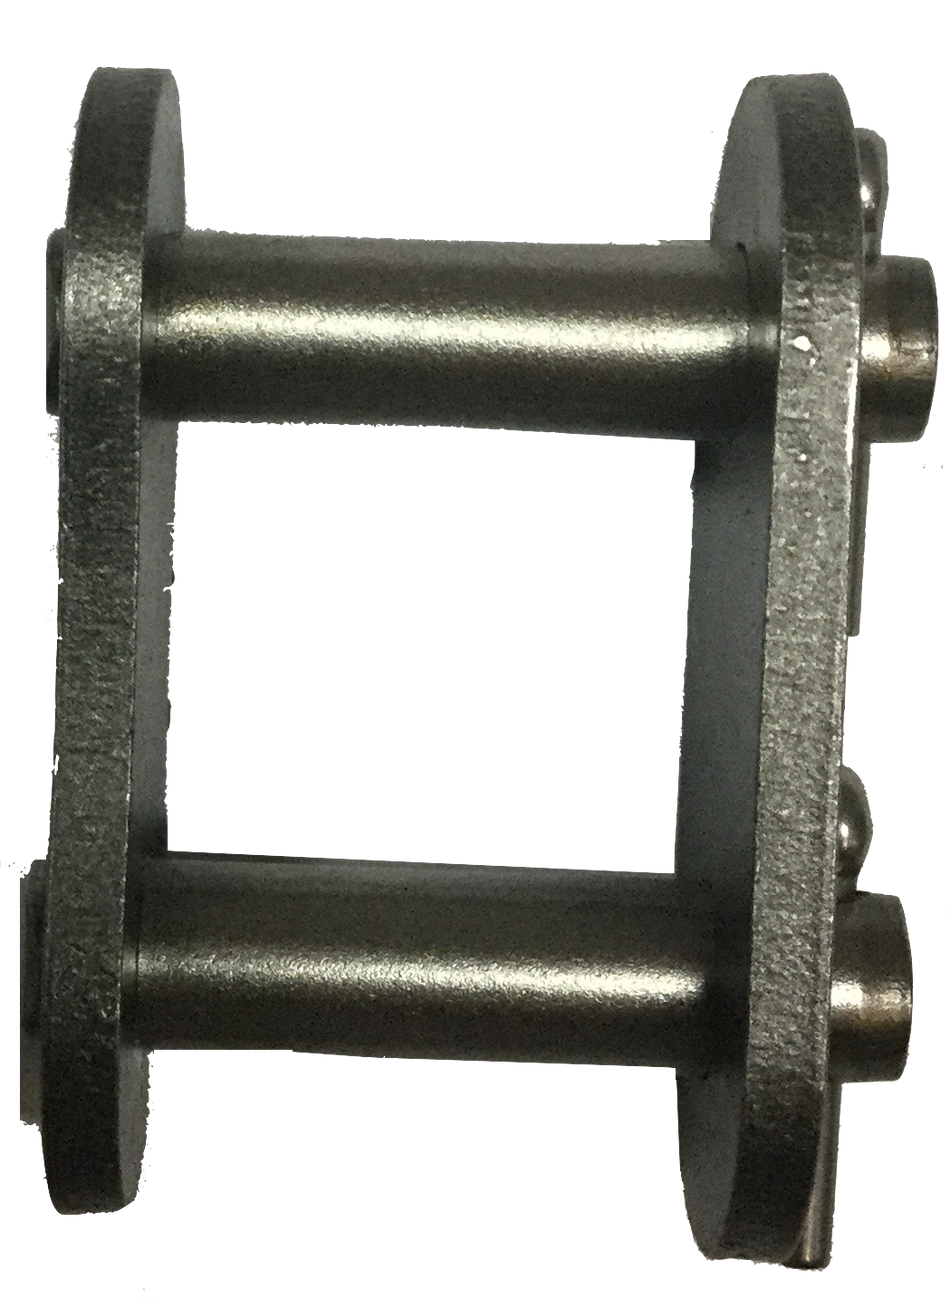 100CL-K1B2 #100 Standard Roller Chain Connecting Link w/ K1 Attachment (1 1/4" Pitch) - Froedge Machine & Supply Co., Inc.